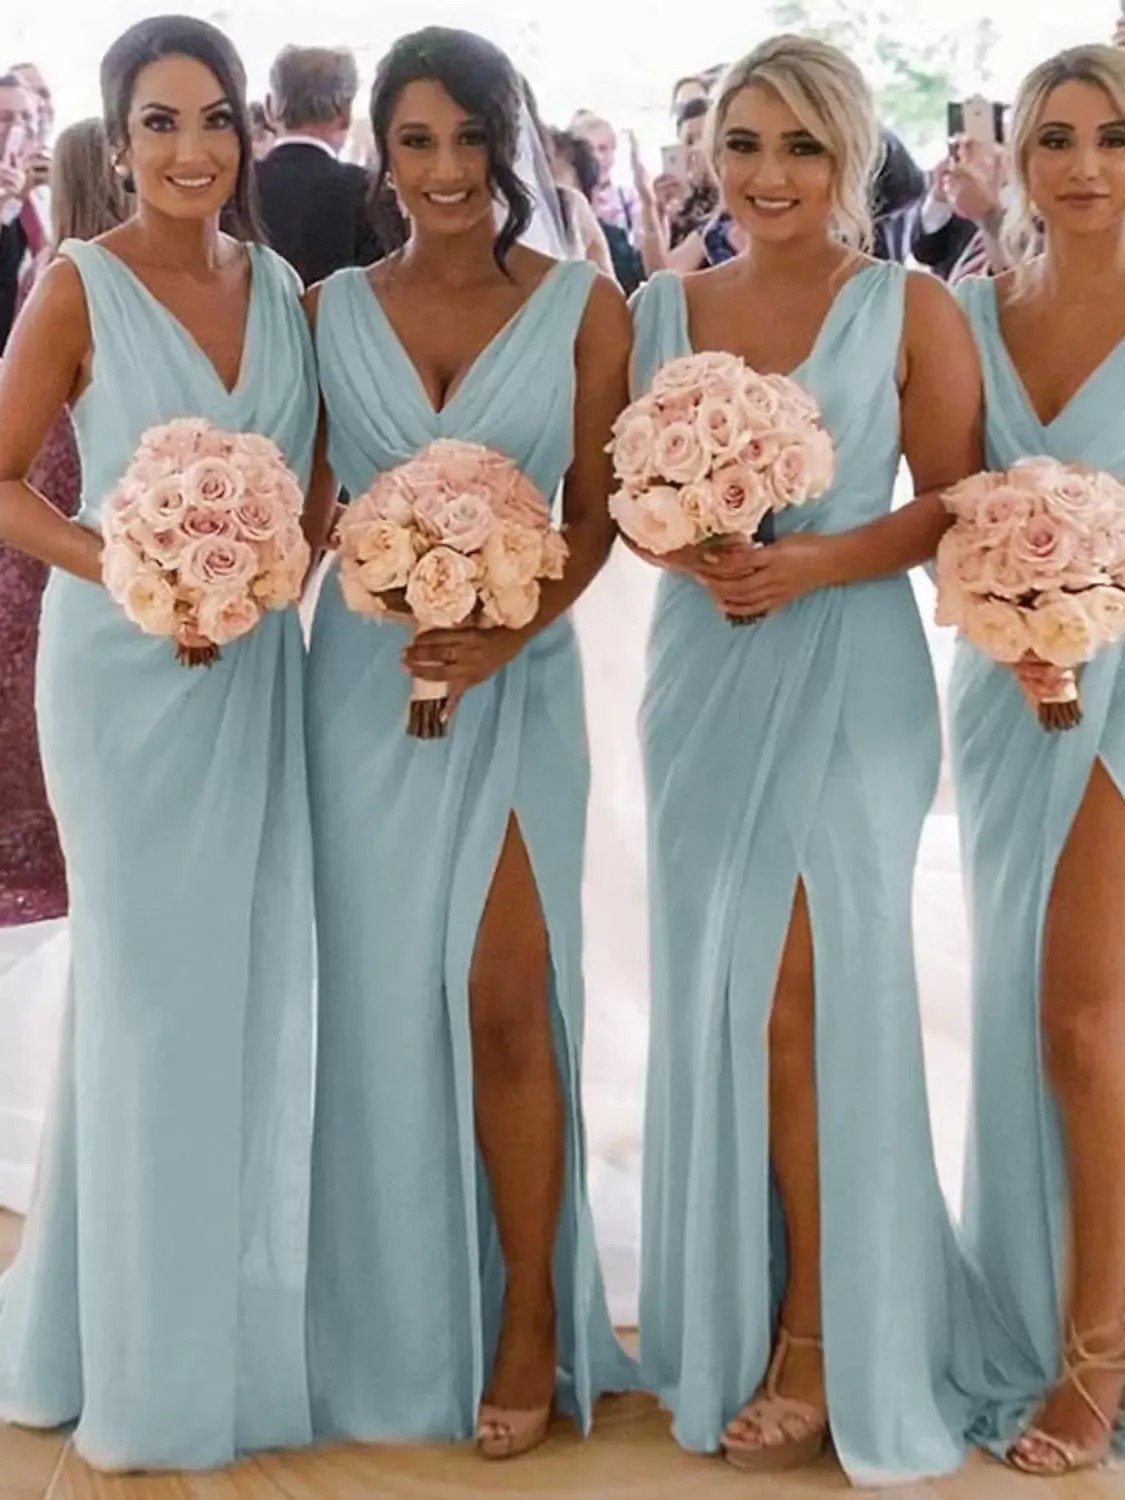 Custom Made Baby Blue A Line Dusty Blue Bridesmaid With V Neck, Chiffon  Fabric, Side Slit, And Floor Length Hemline Perfect For Formal Evening Wear  And Maid Of Honor Gowns From Suelee_dress